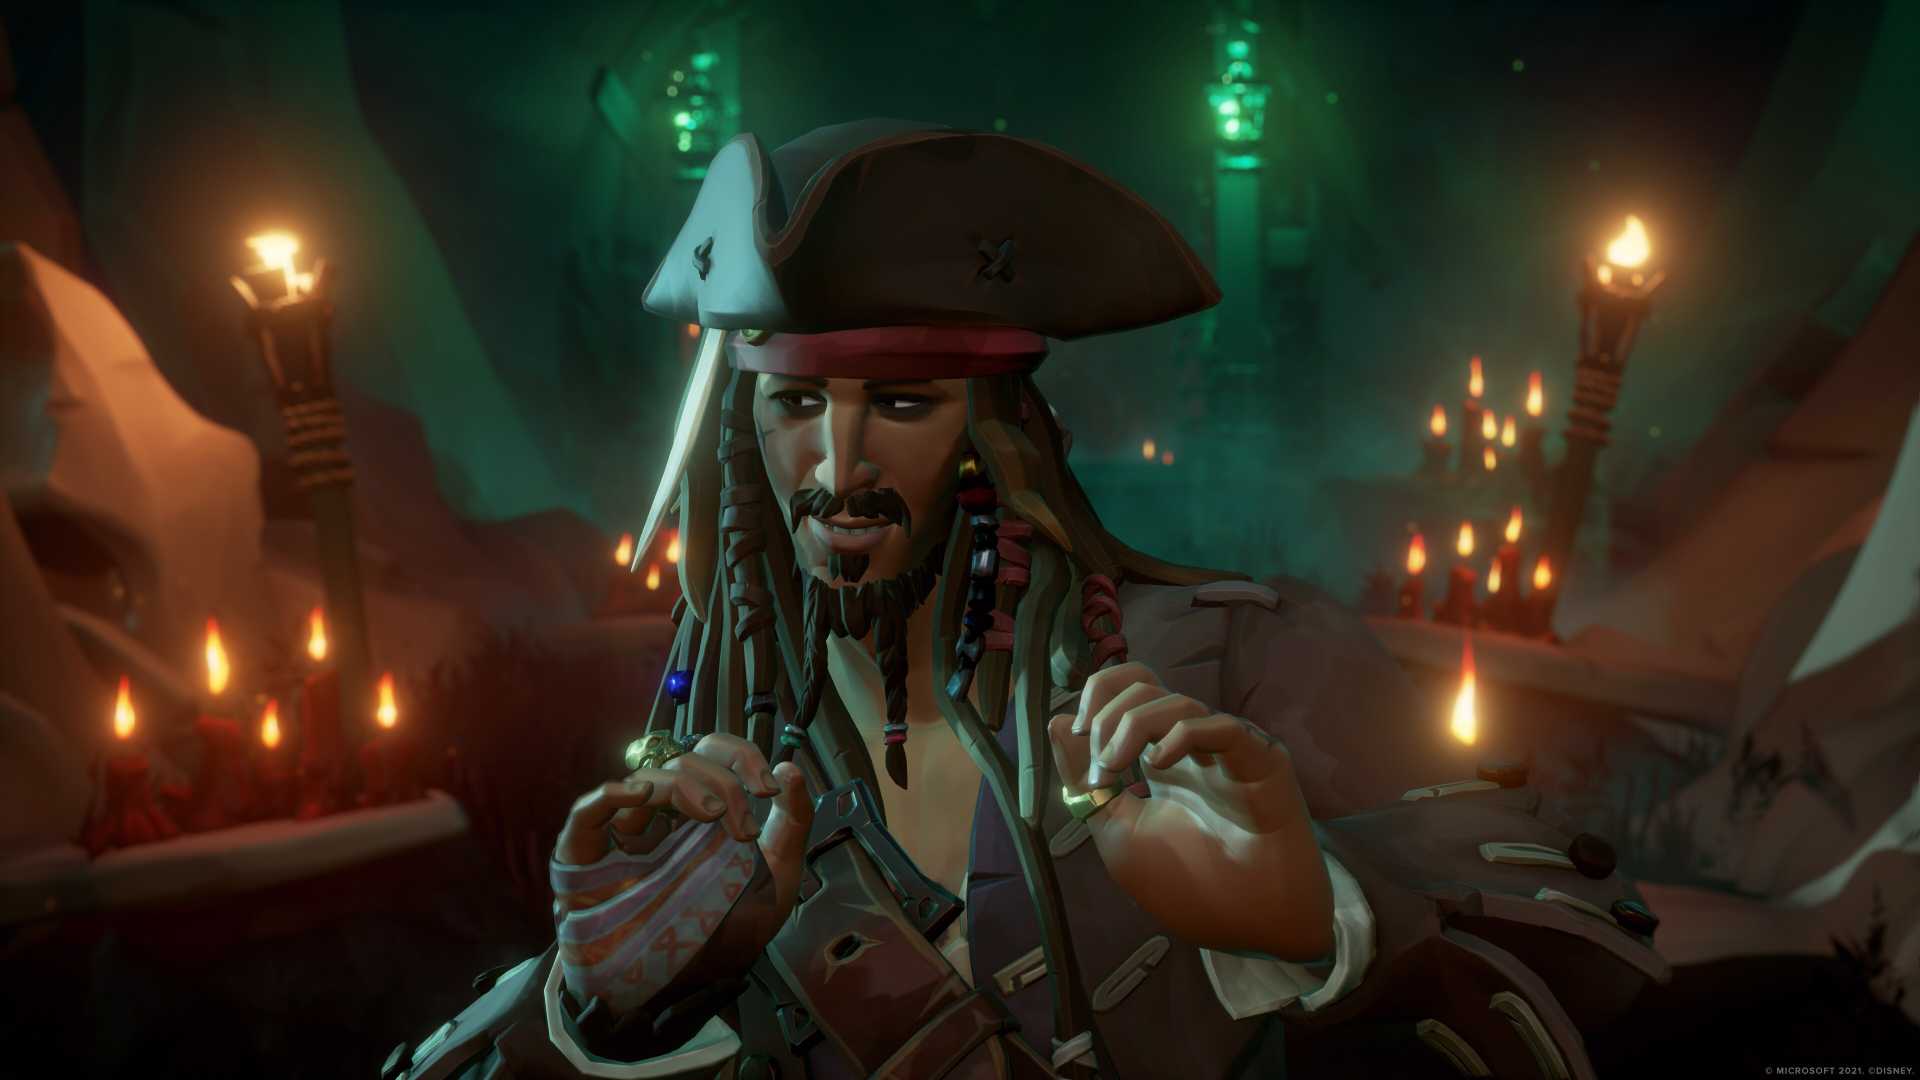 sea-of-thieves-cant-load-captained-ships-issue-on-pc-and-xbox-is-it-fixed-yet 